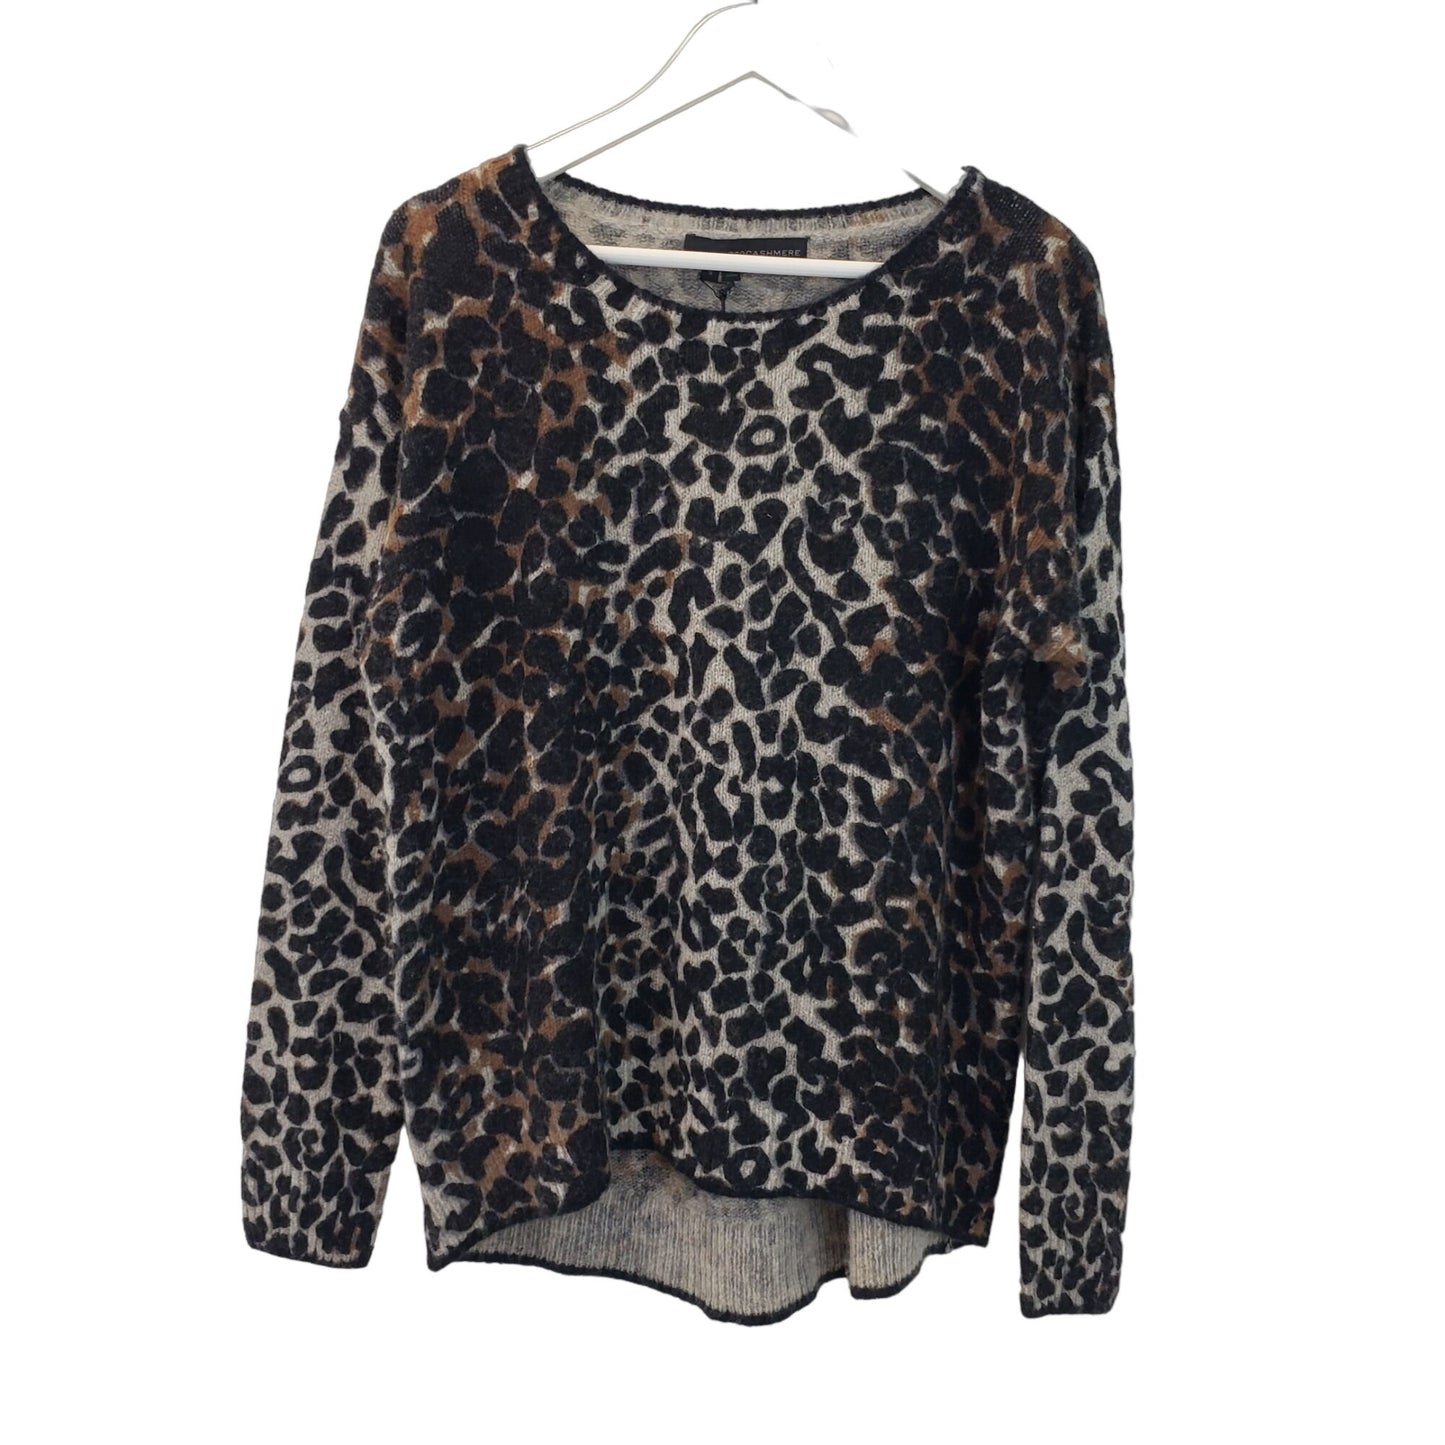 NWT 360 Cashmere Leopard Print Cashmere & Wool Blend Sweater Size Small